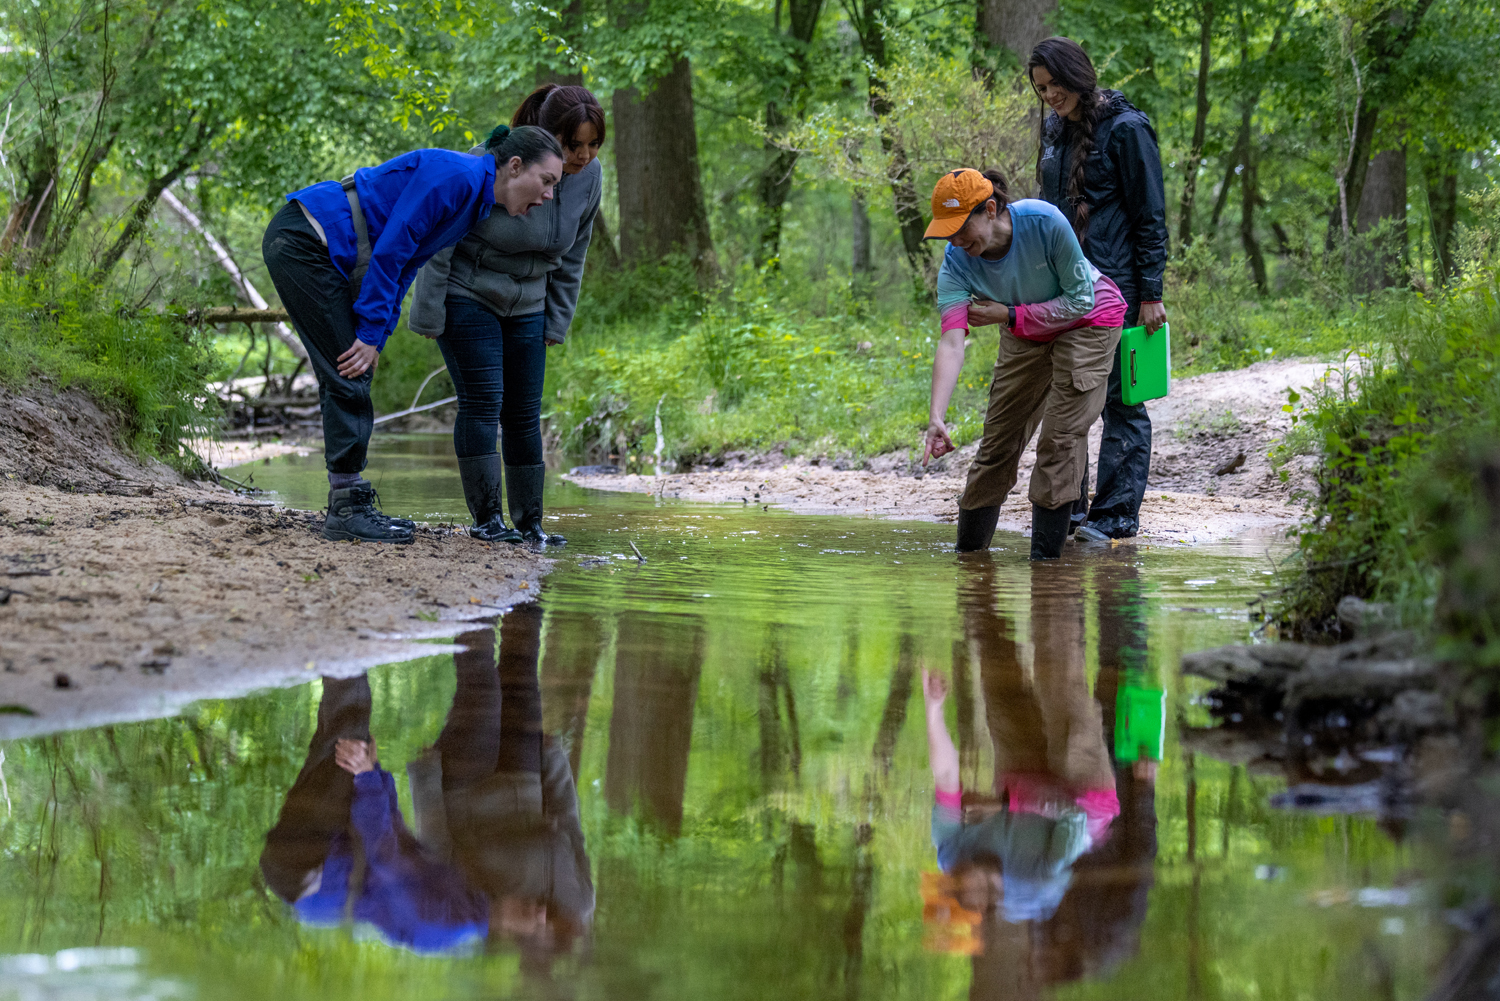 the researchers look at a mussel in the creek